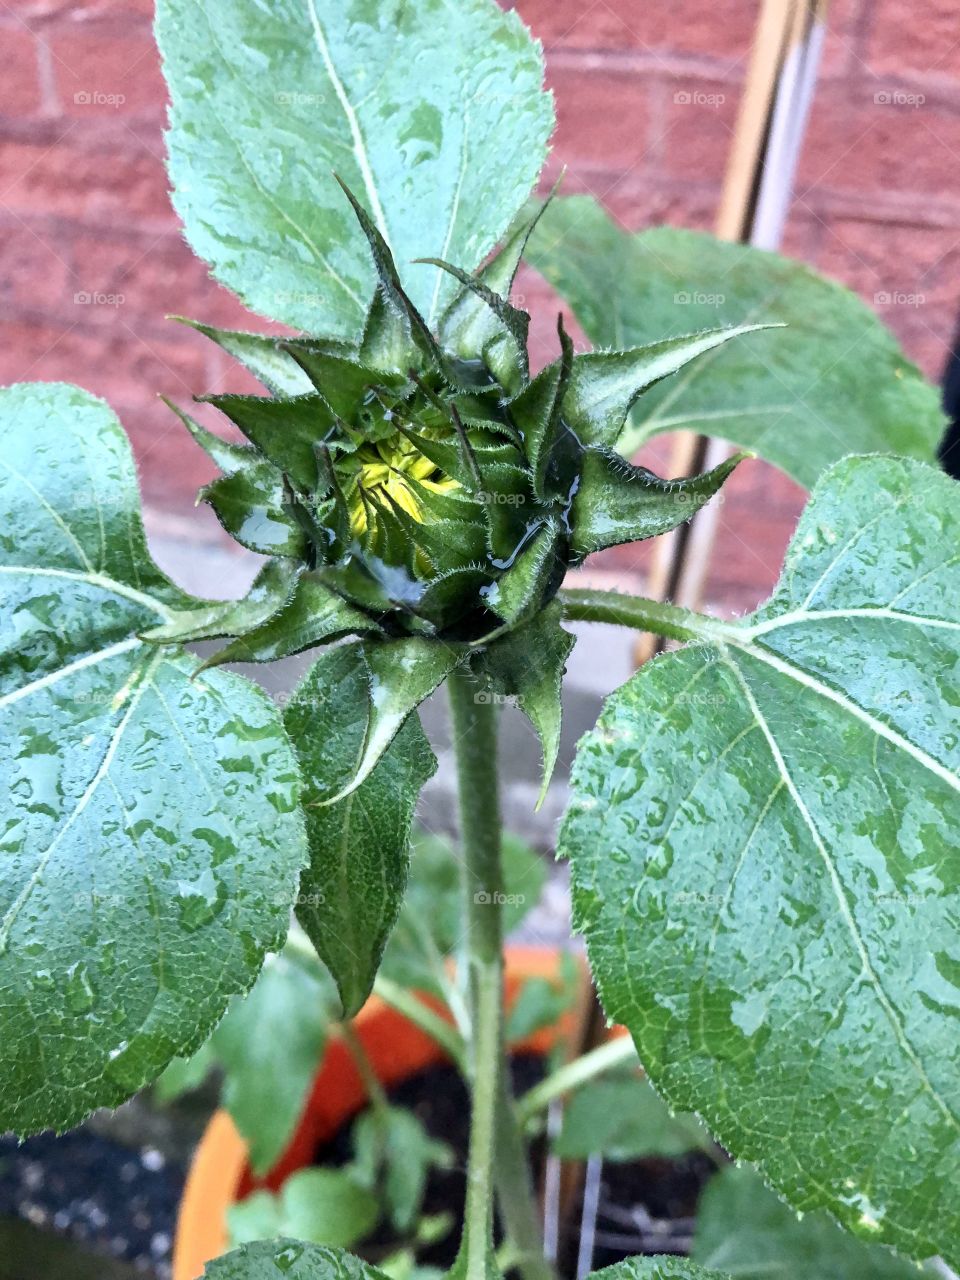 Sunflower about to bloom with raindrops